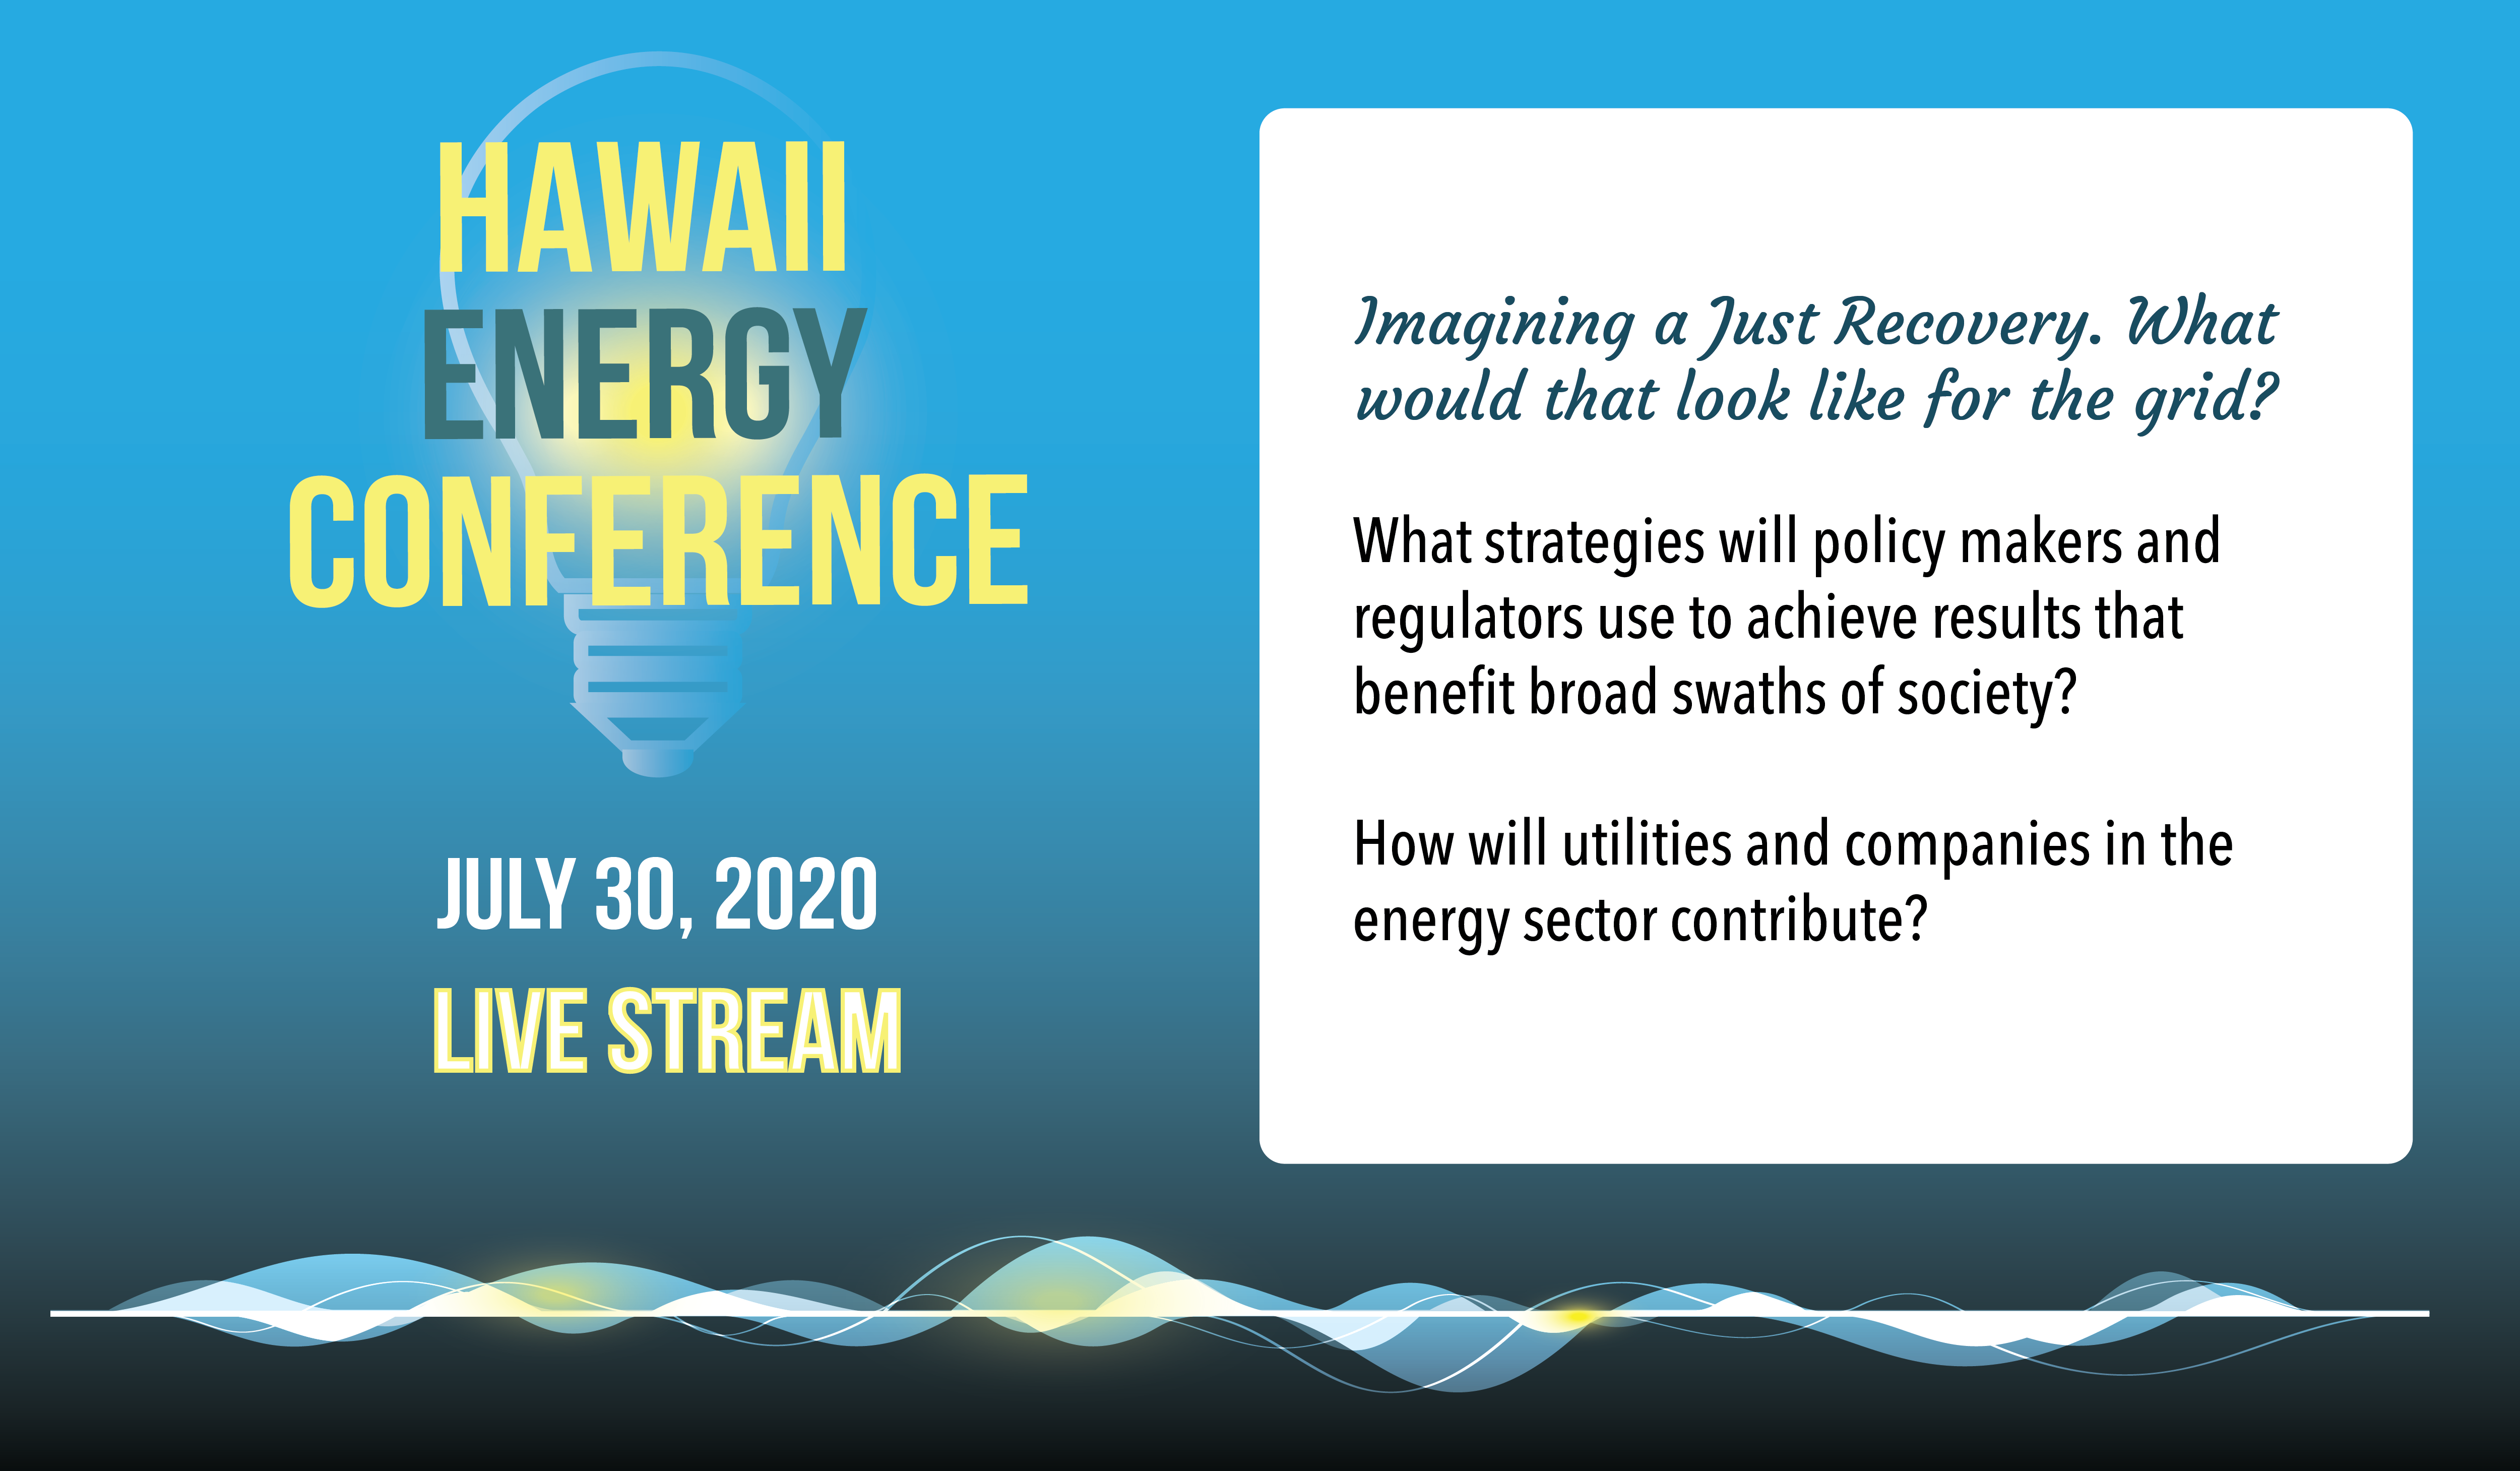 2020 Hawaii Energy Conference Imagines a Just Recovery